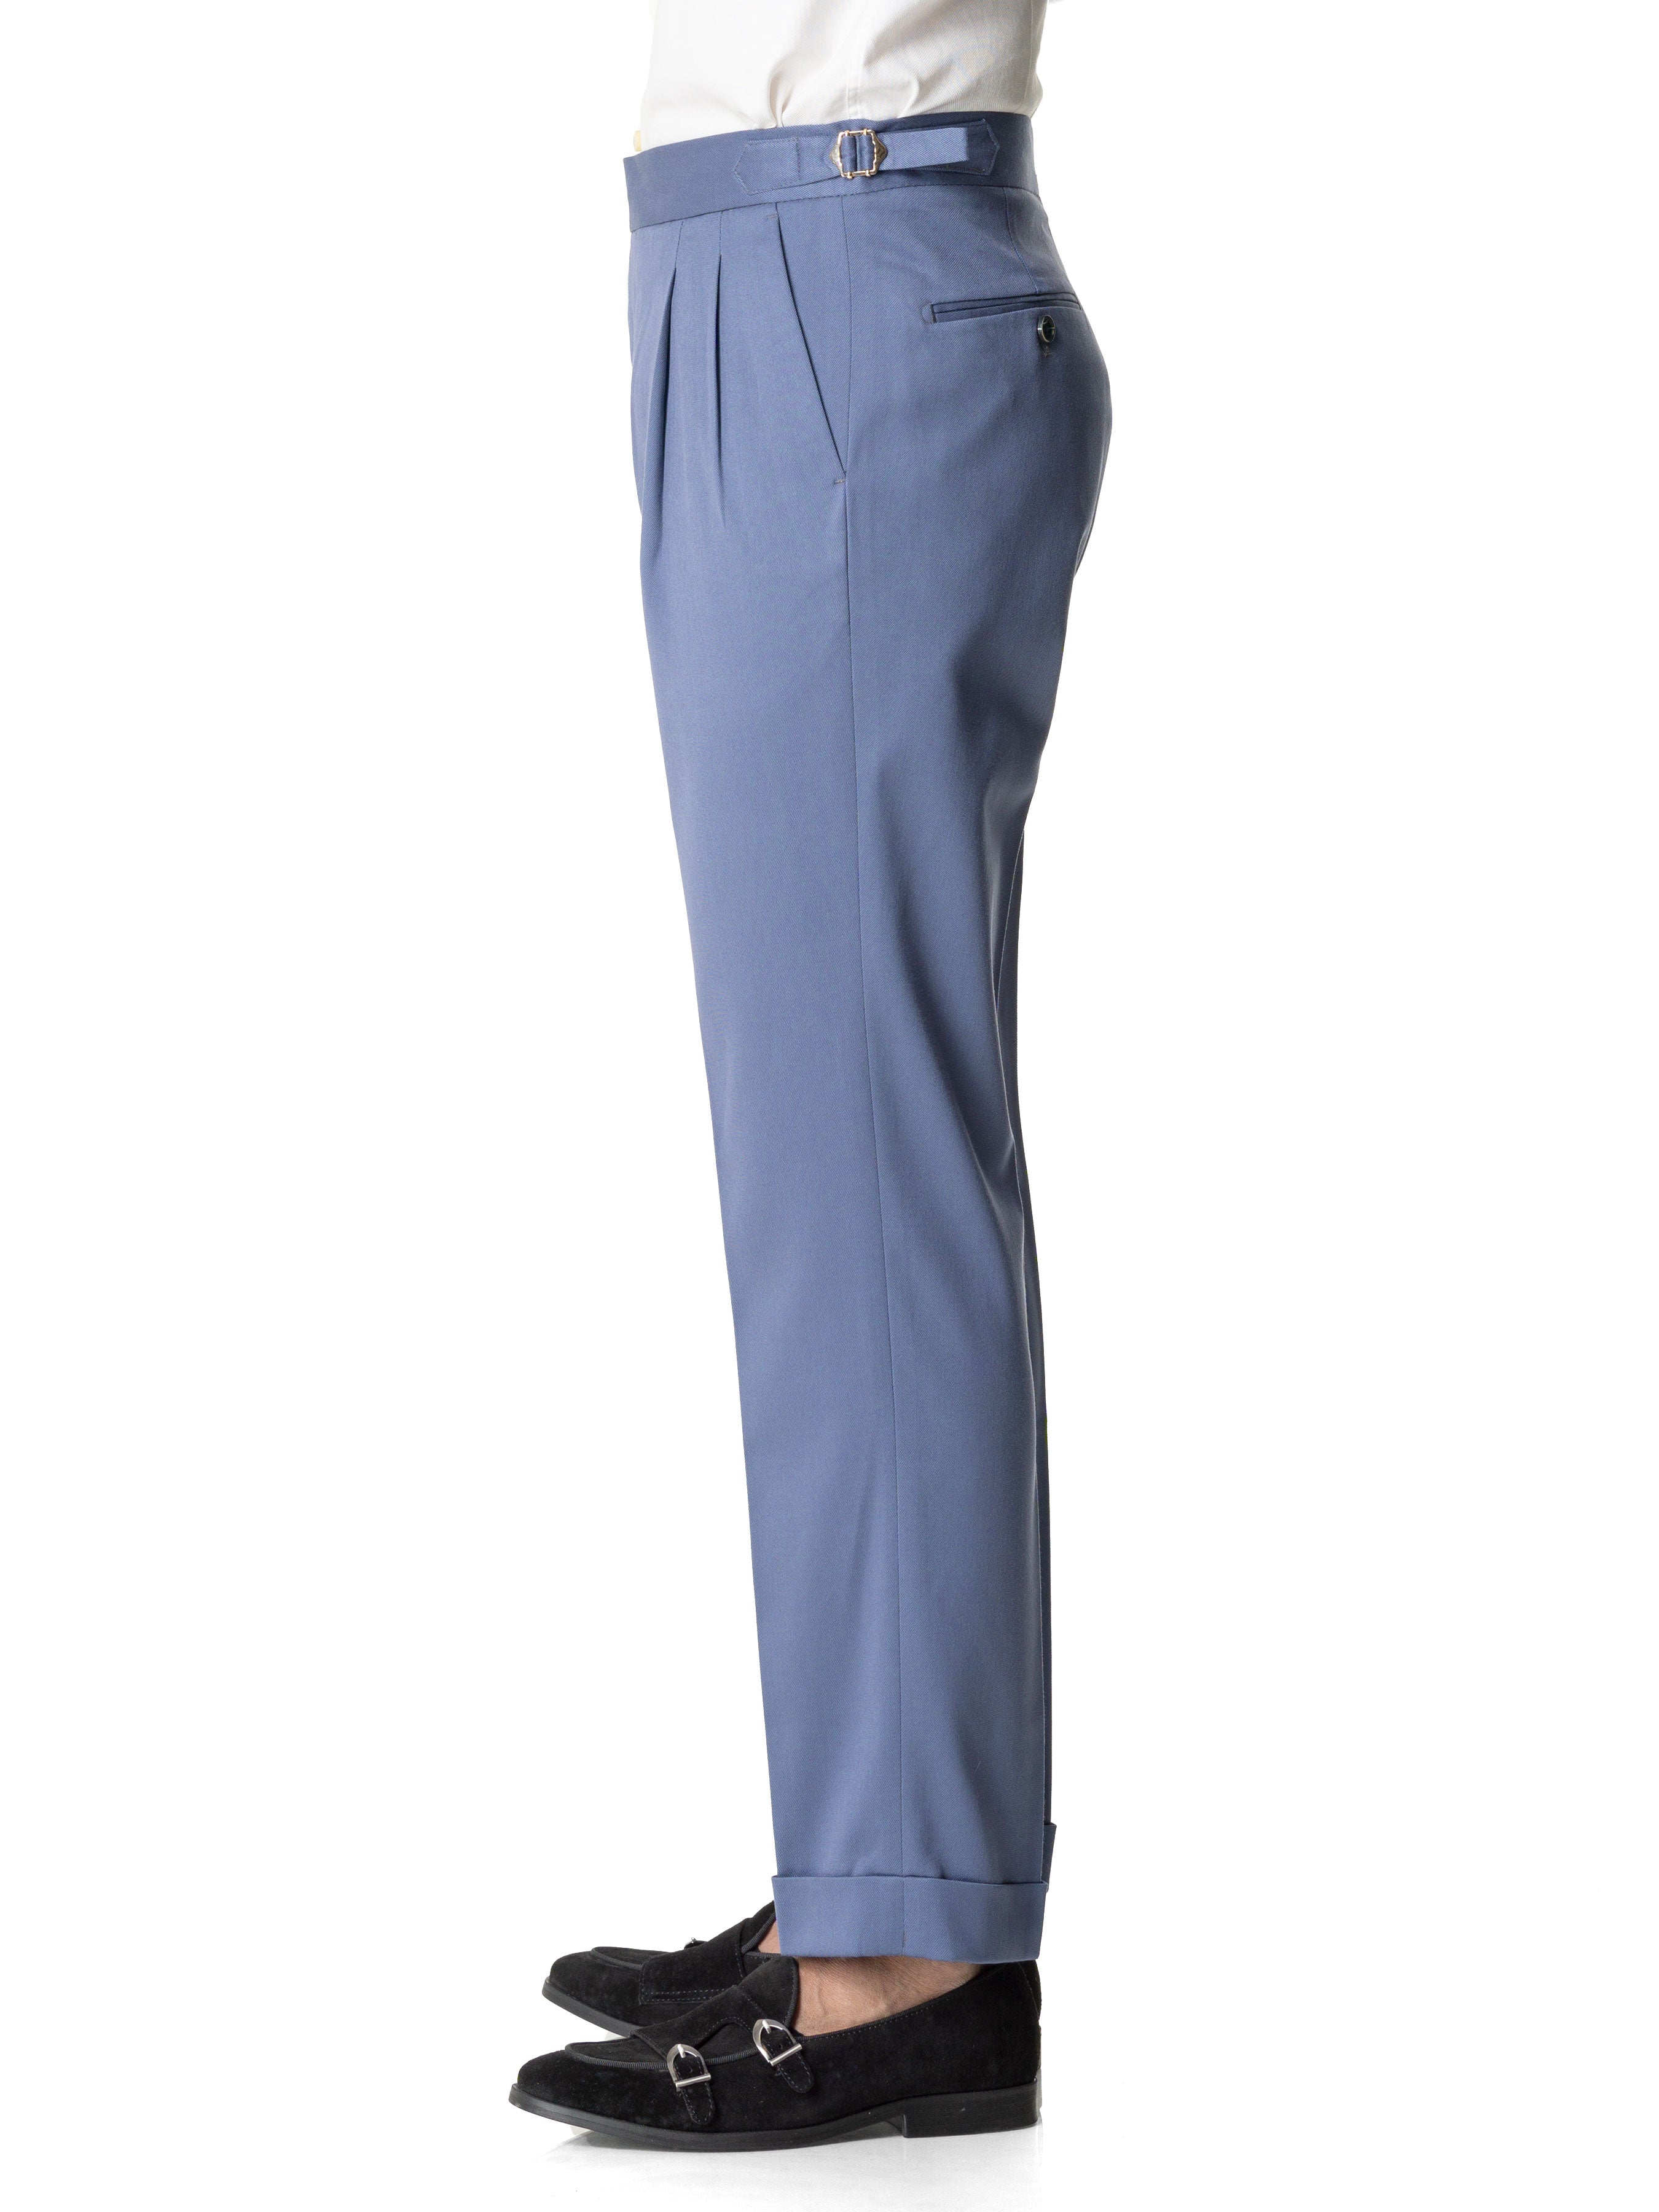 Trousers With Side Adjusters - Light Blue Plain Cuffed (Stretchable) - Zeve Shoes